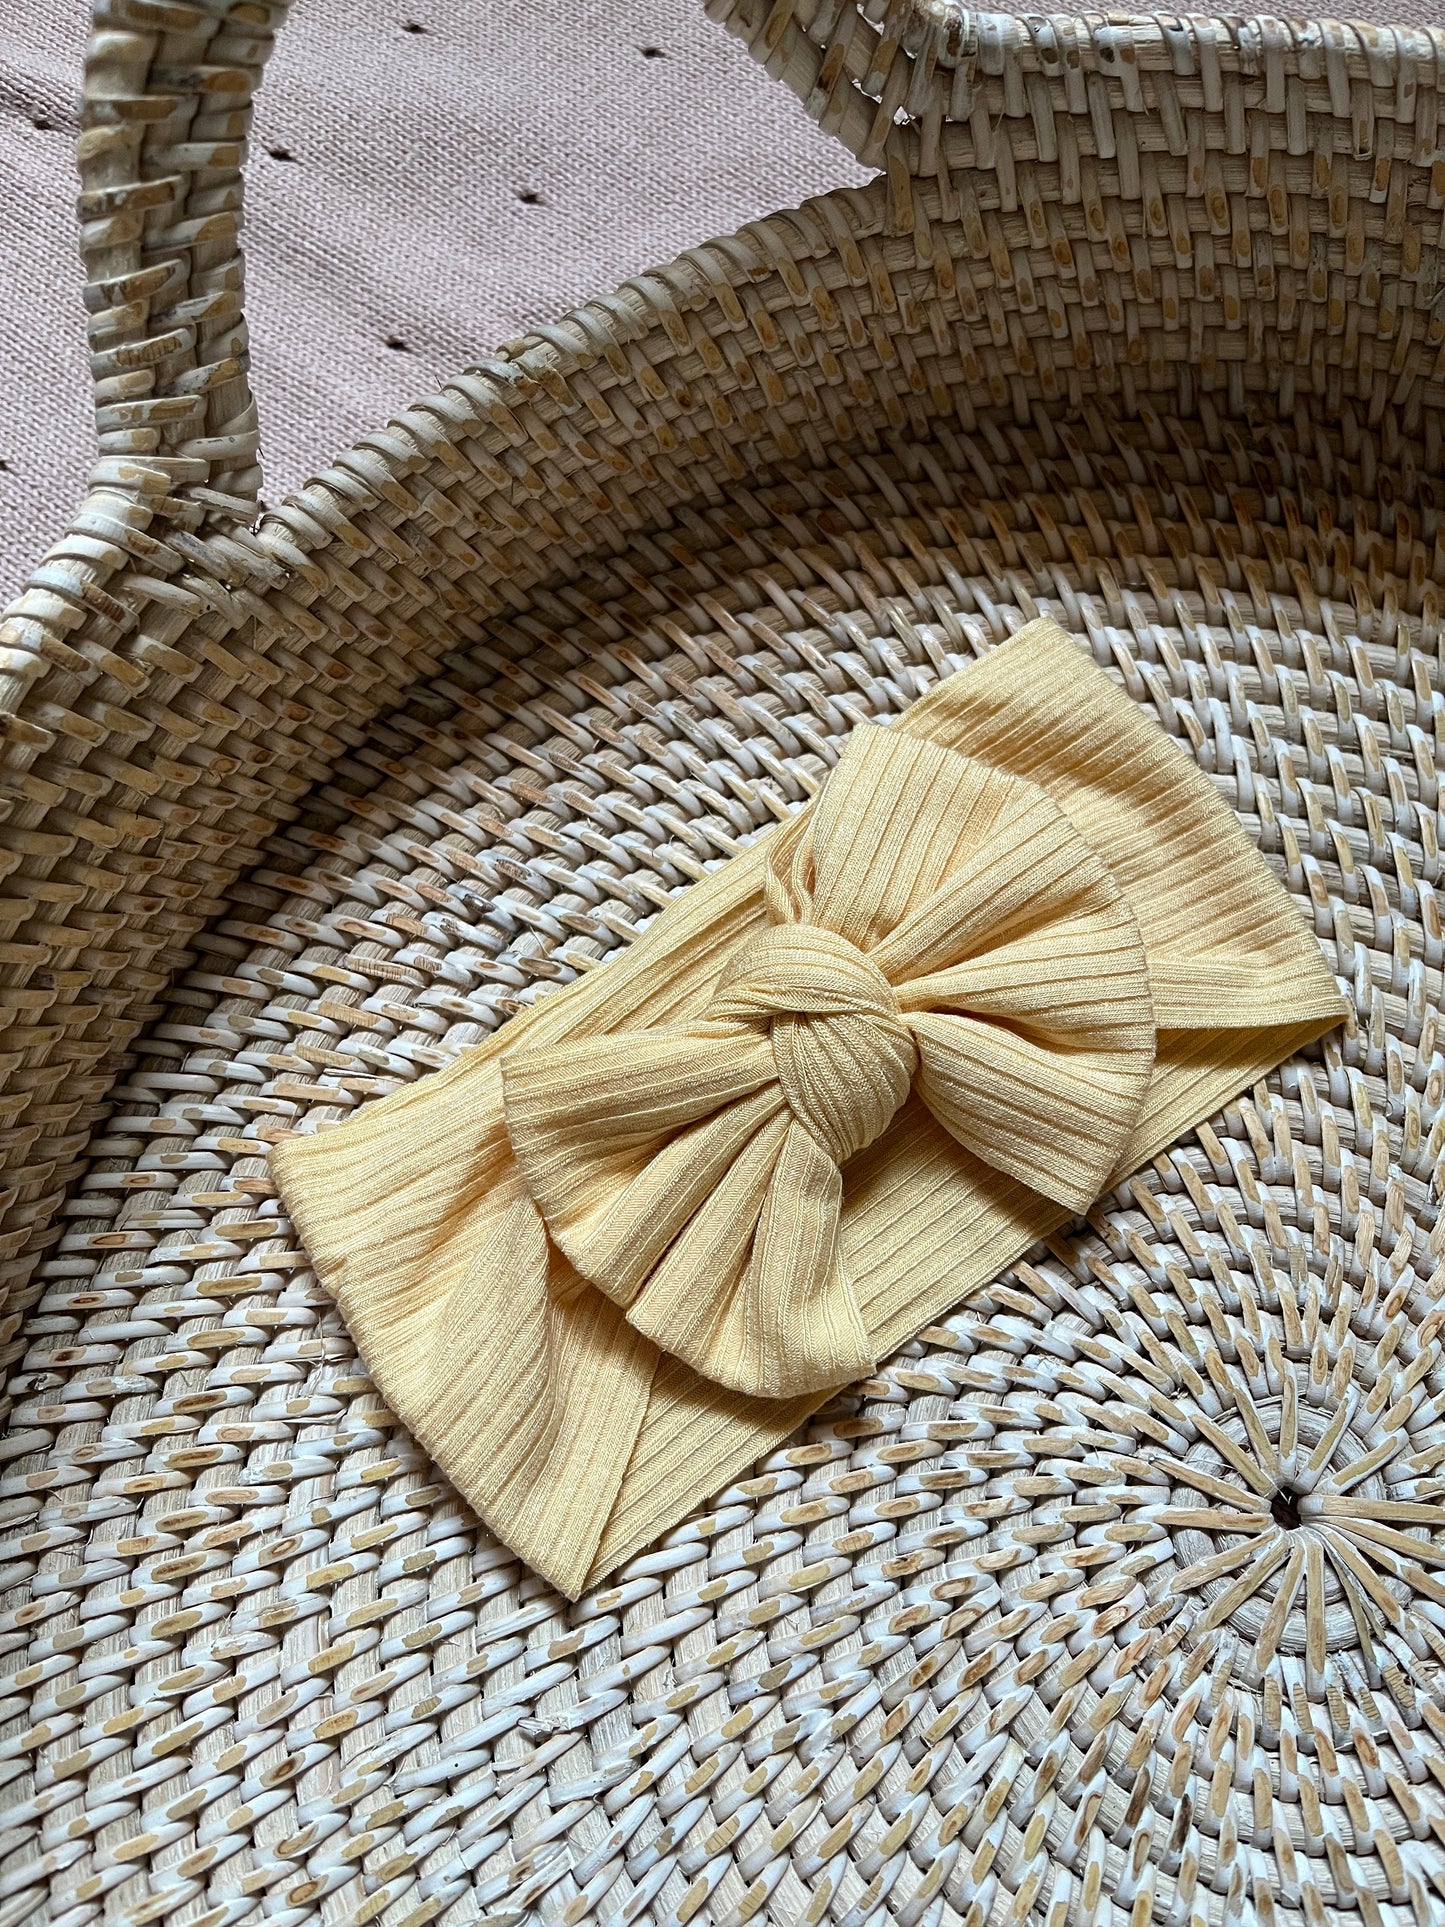 Ribbed Bow Headband in Buttercup